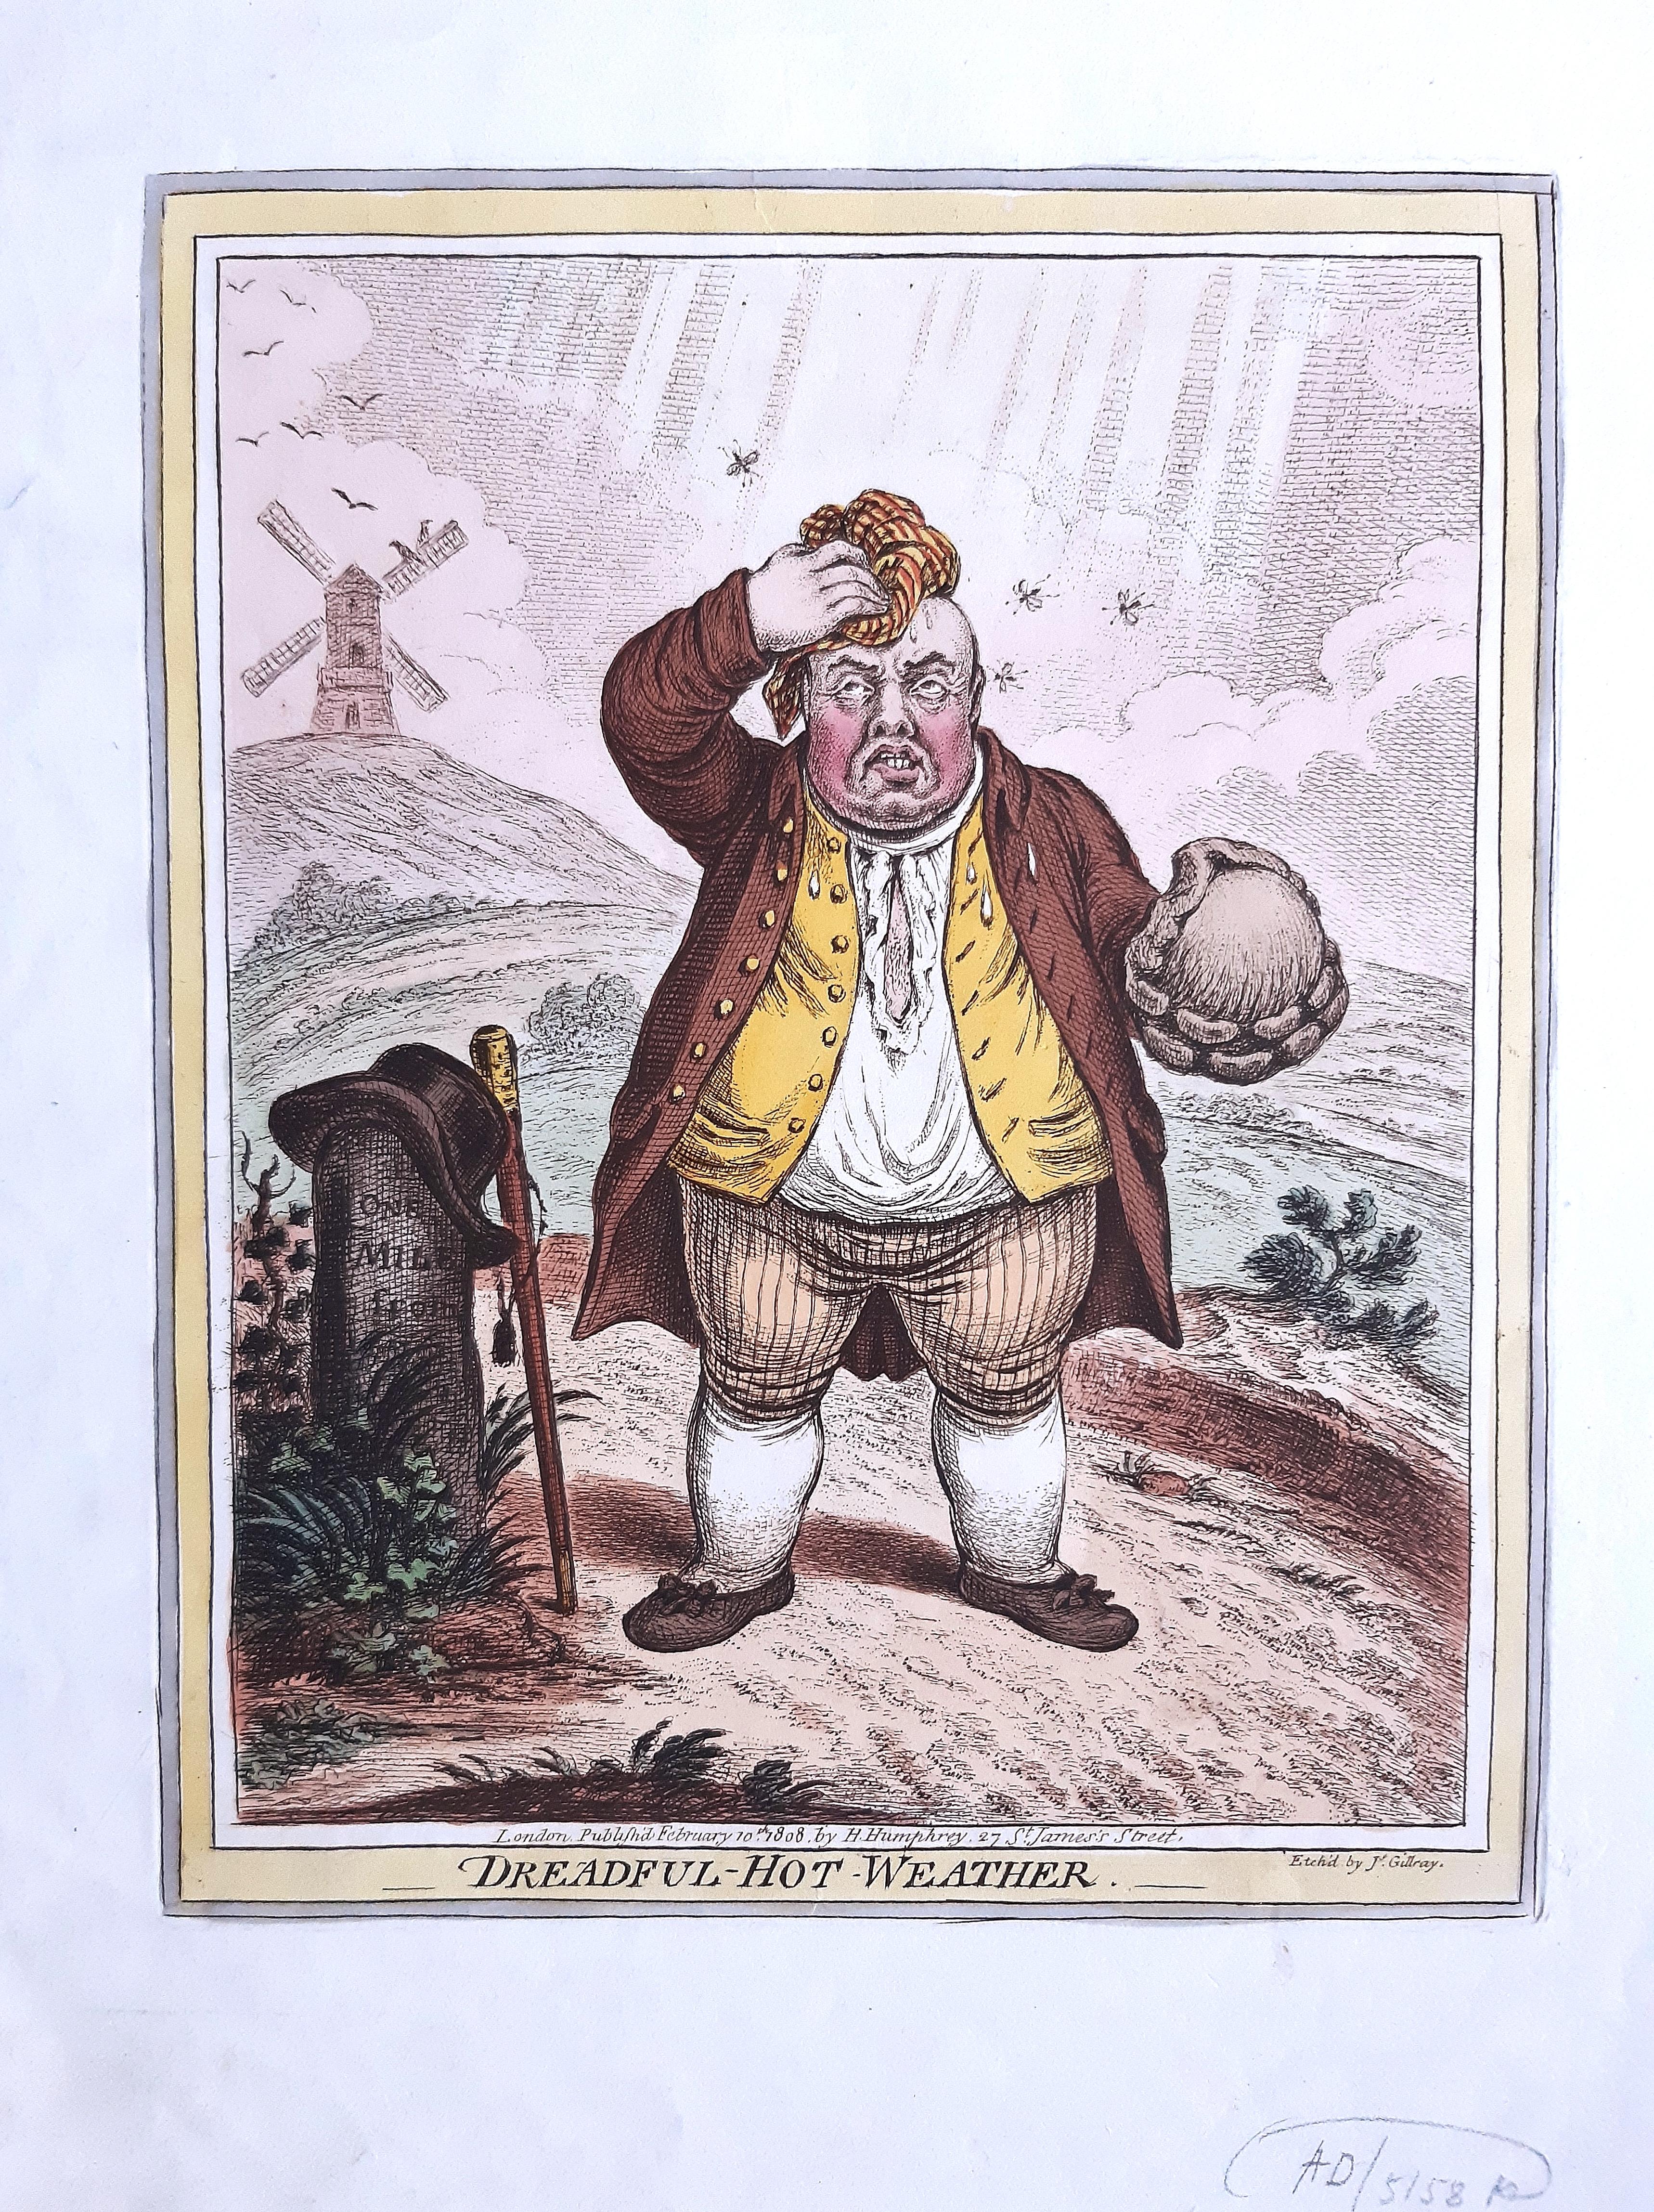 Delicious Weather is an original series of 5 hand-coloured etchings realized by James Gillray in 1808, these etching title are: Delicious weather, Sad sloppy weather,  Dreadful hot weather, Windy weather,  Raw weather,  edition  H. Humphrey,